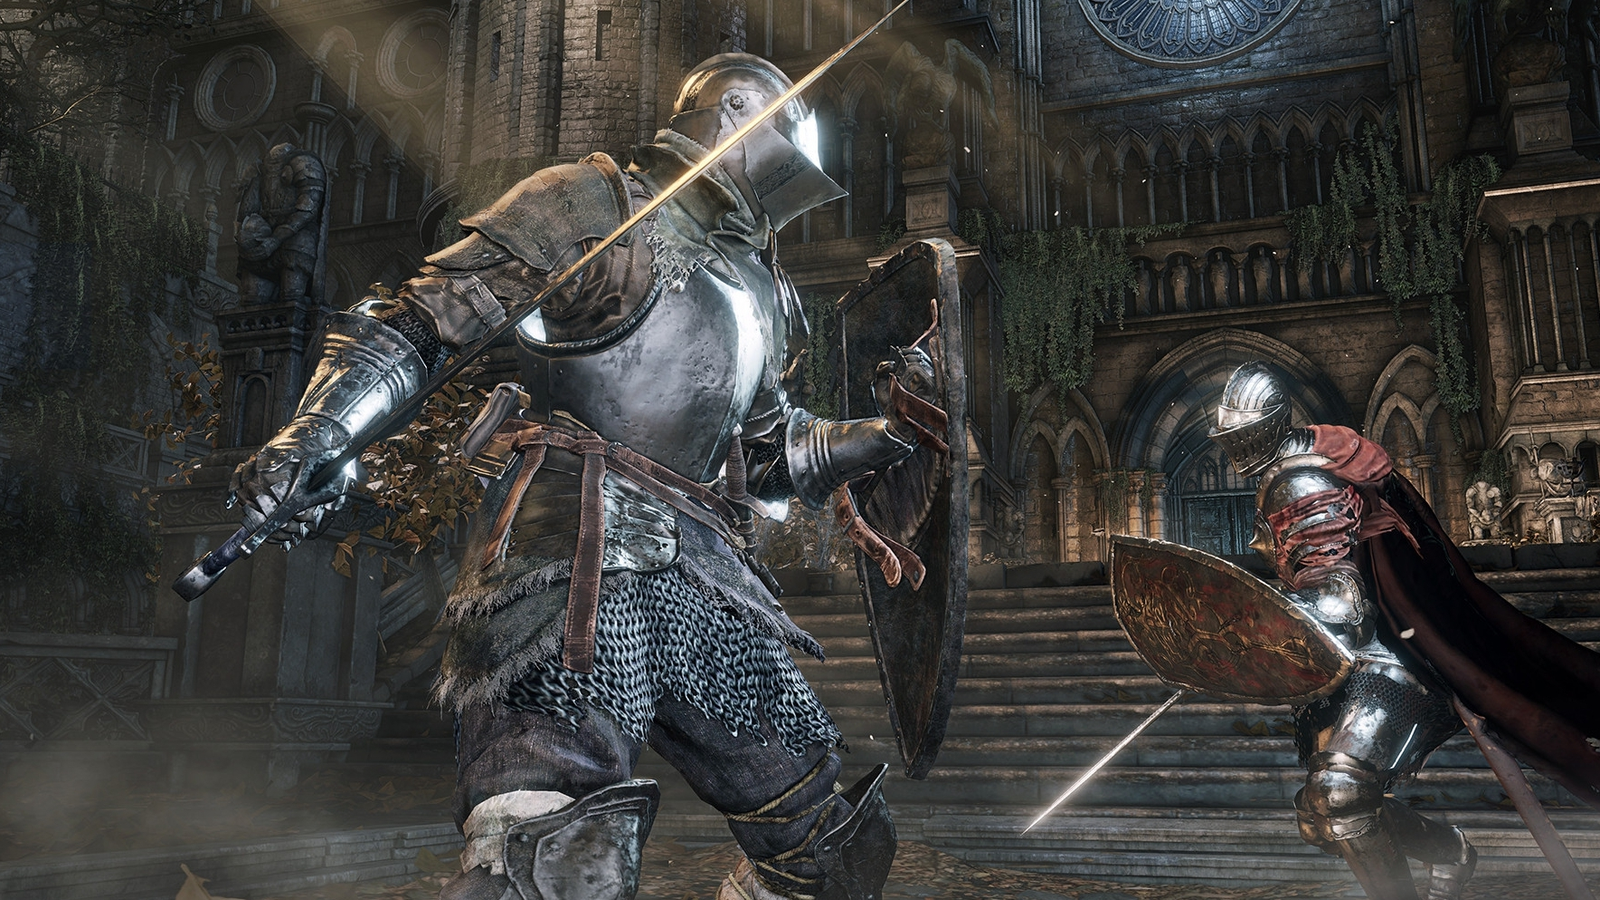 Dark Souls Trilogy Coming To PS4 And Xbox One, Watch The Trailer Here -  GameSpot